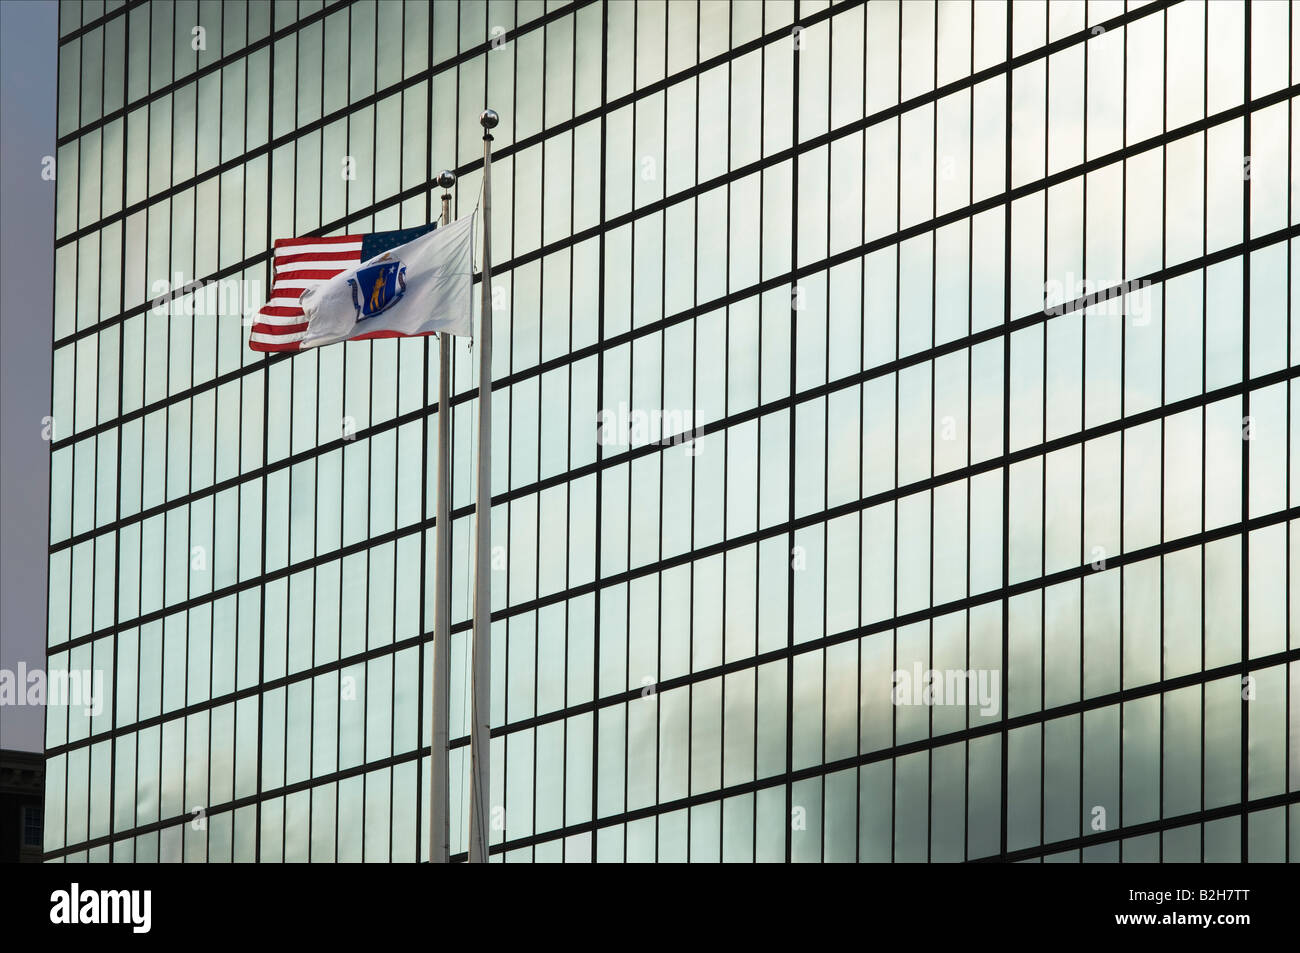 Massachusetts and American flags flying in front of reflective building Stock Photo